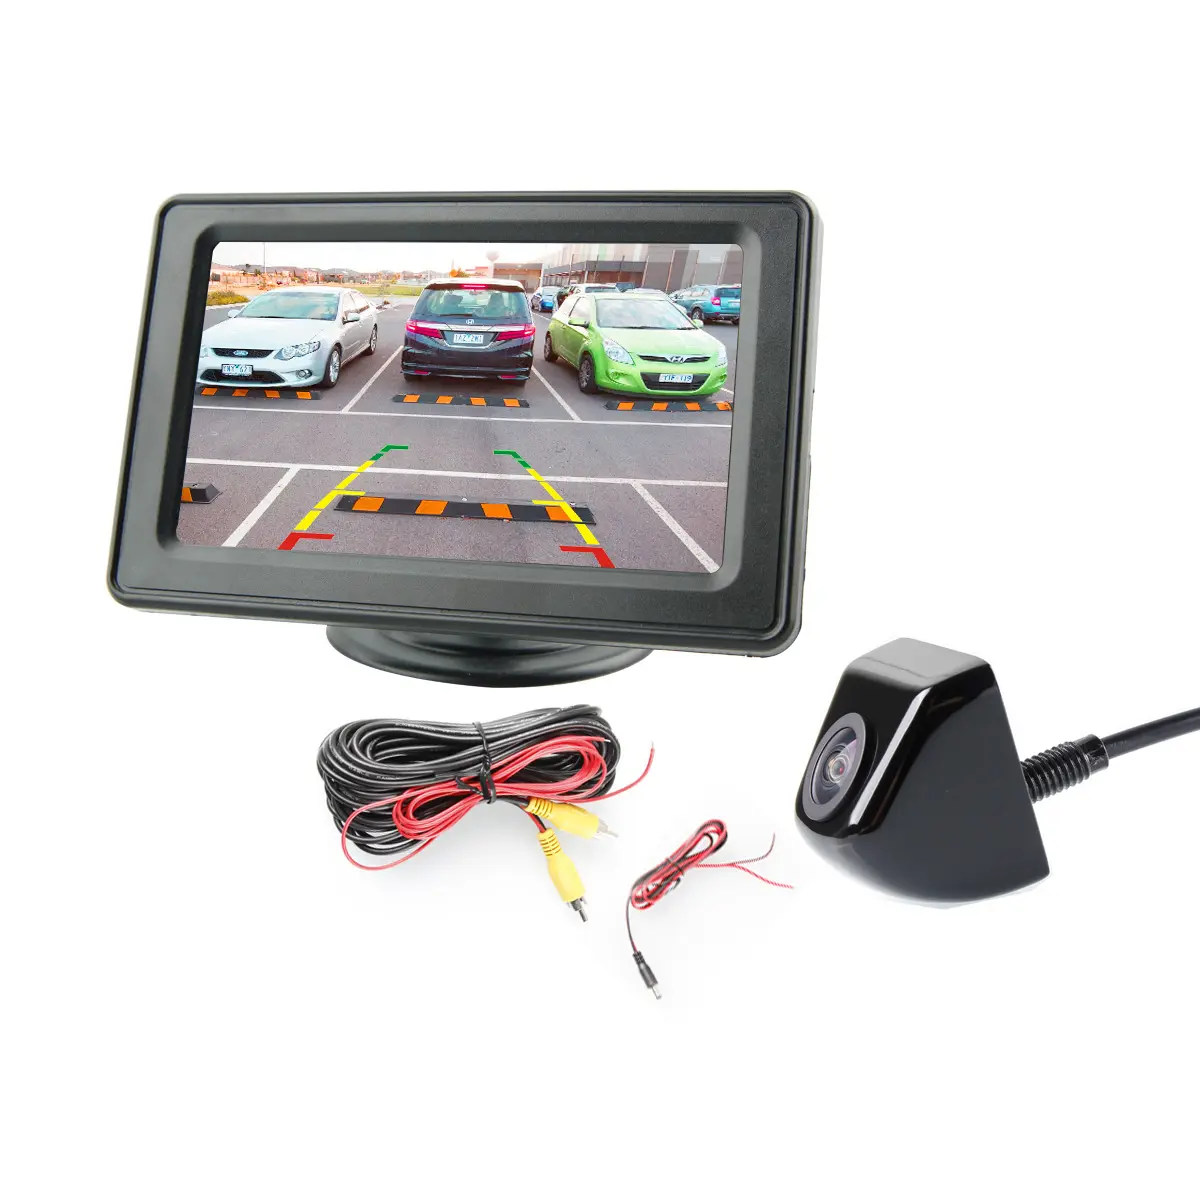 12V Reverse Adjusting Back Camera With Parking Line Car Reversing Aid Rear View Parking Assistance System For Auto Parts